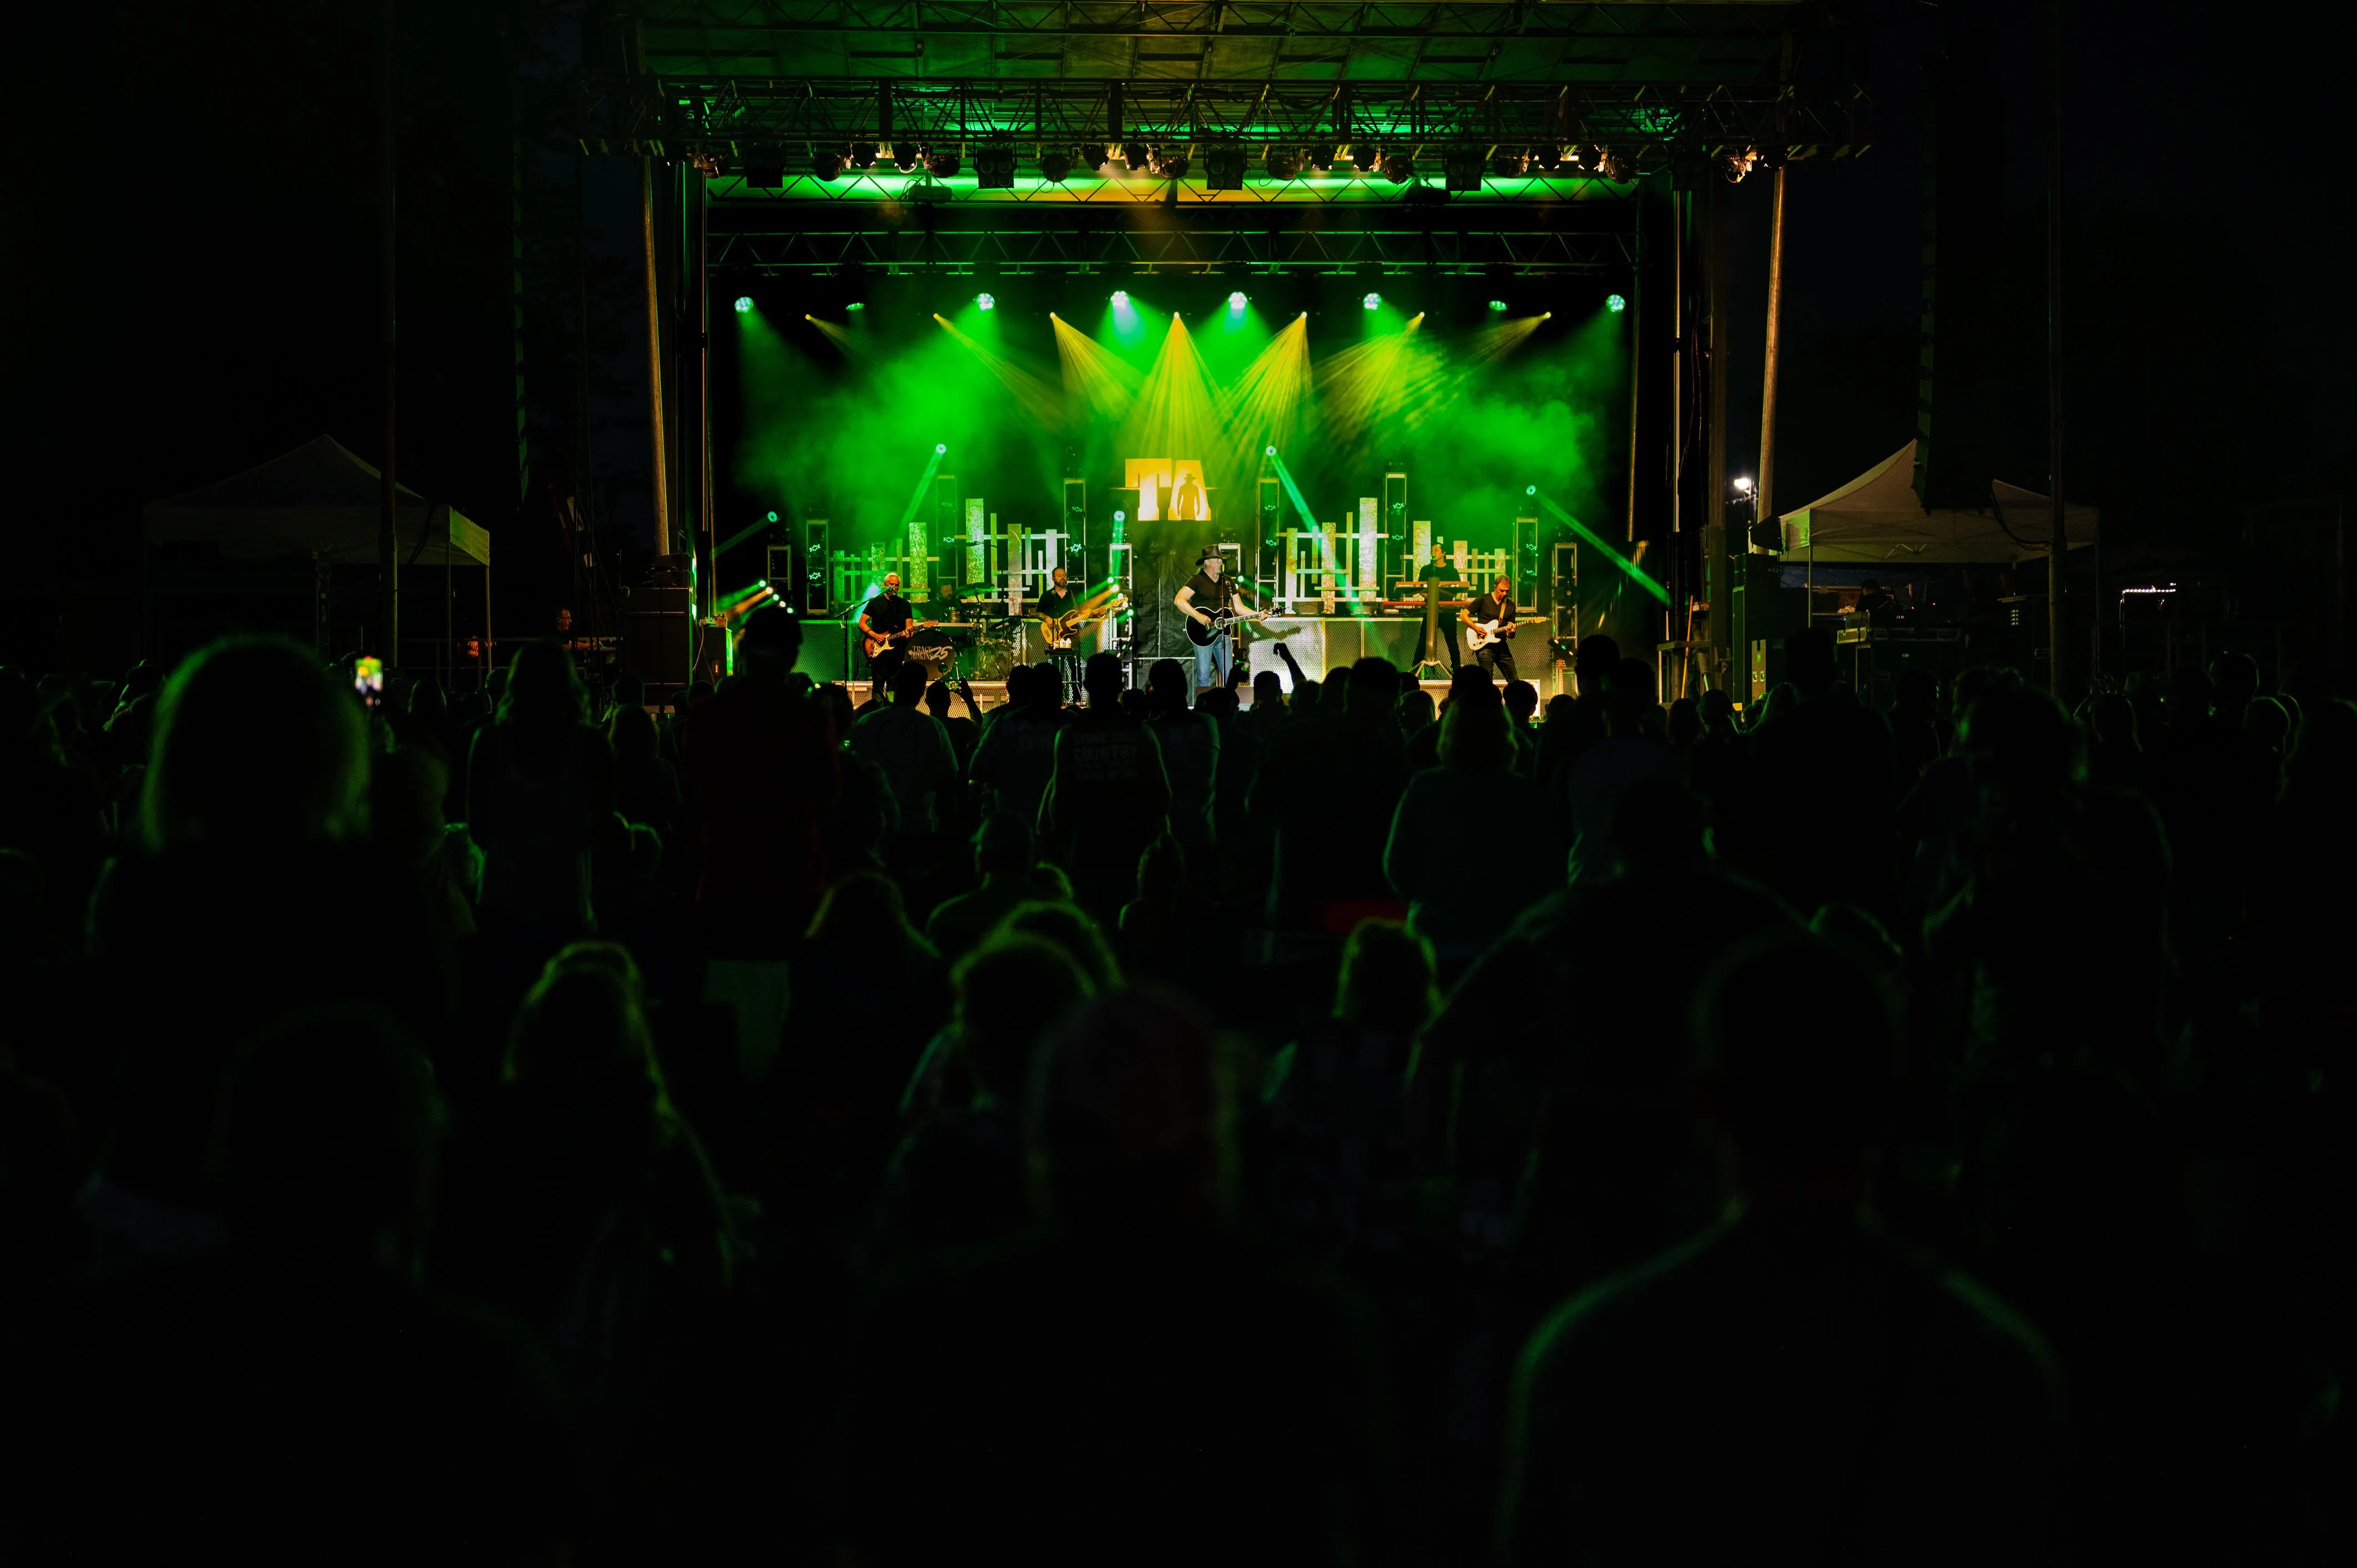 Crowd watching a live concert with a brightly lit stage under green lights.